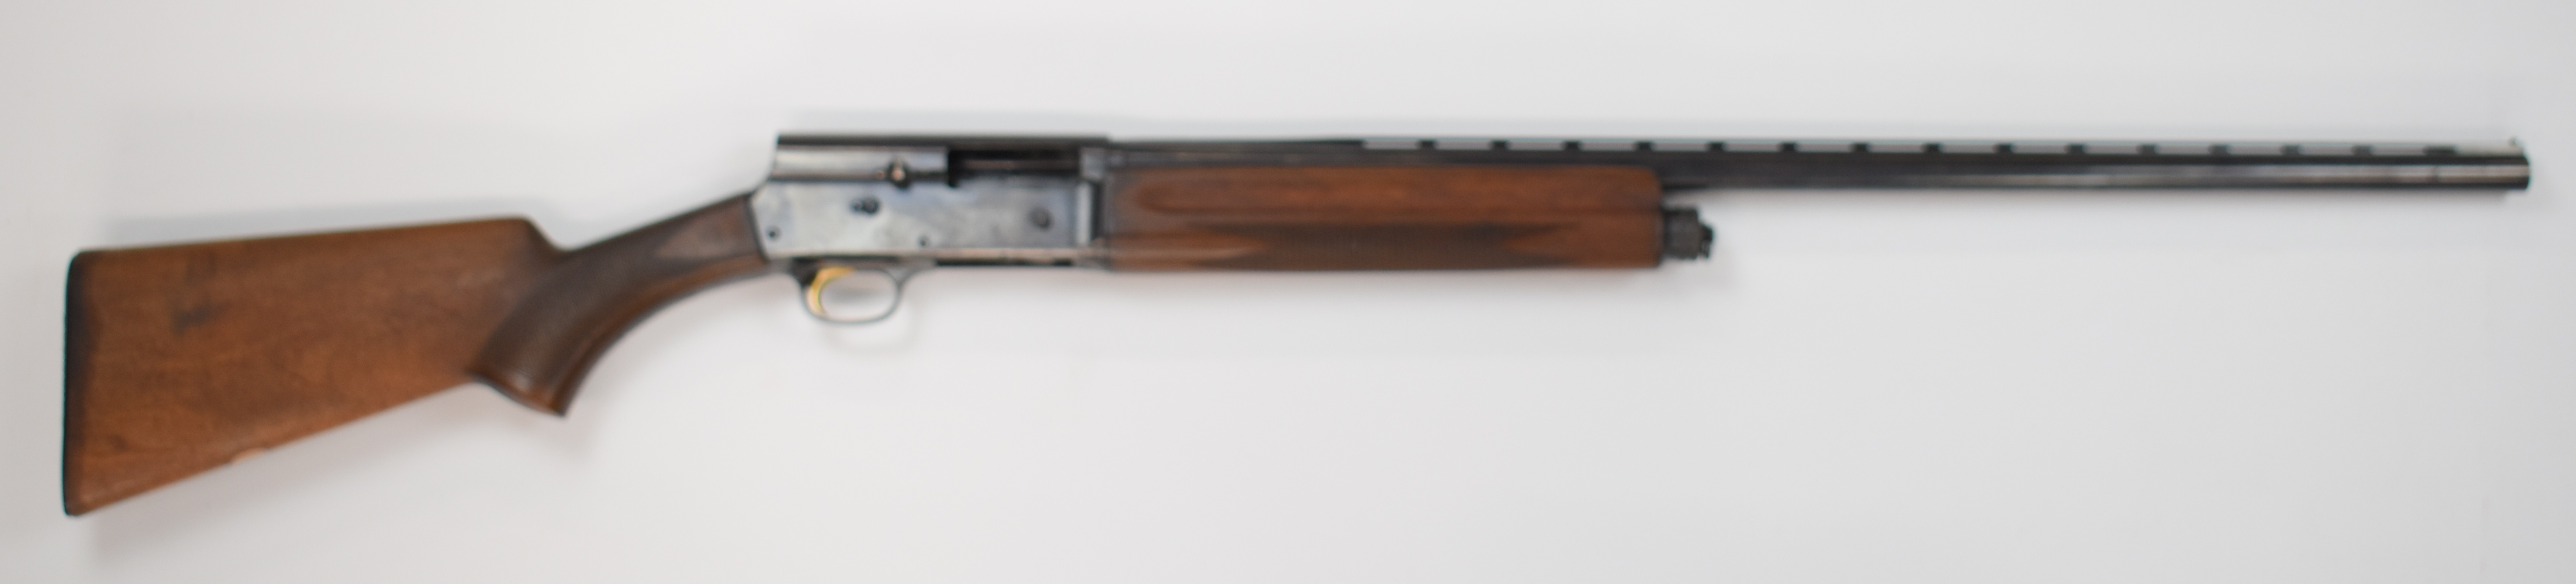 Browning 16 bore 3-shot semi-automatic shotgun with chequered semi-pistol grip and forend and 27 - Image 3 of 18